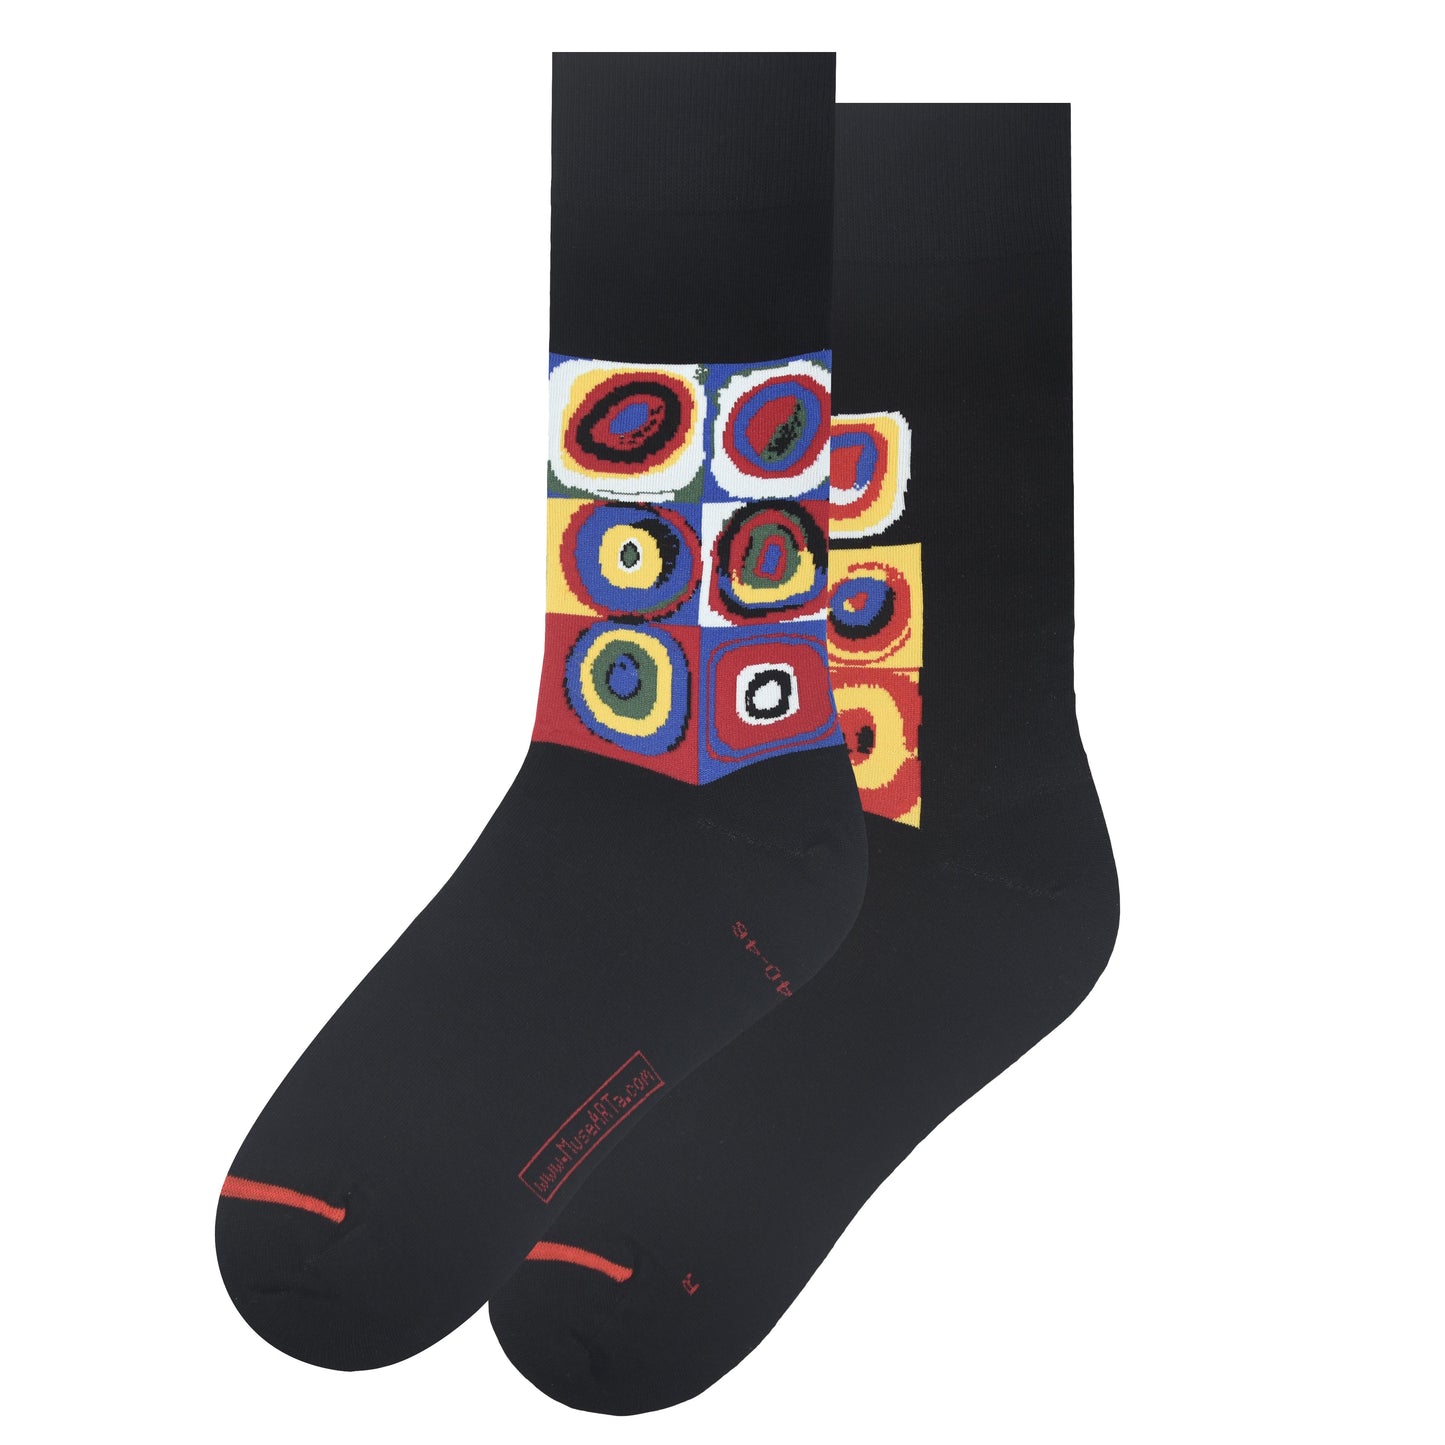 Kandinsky's Squares With Concentric Circles Socks